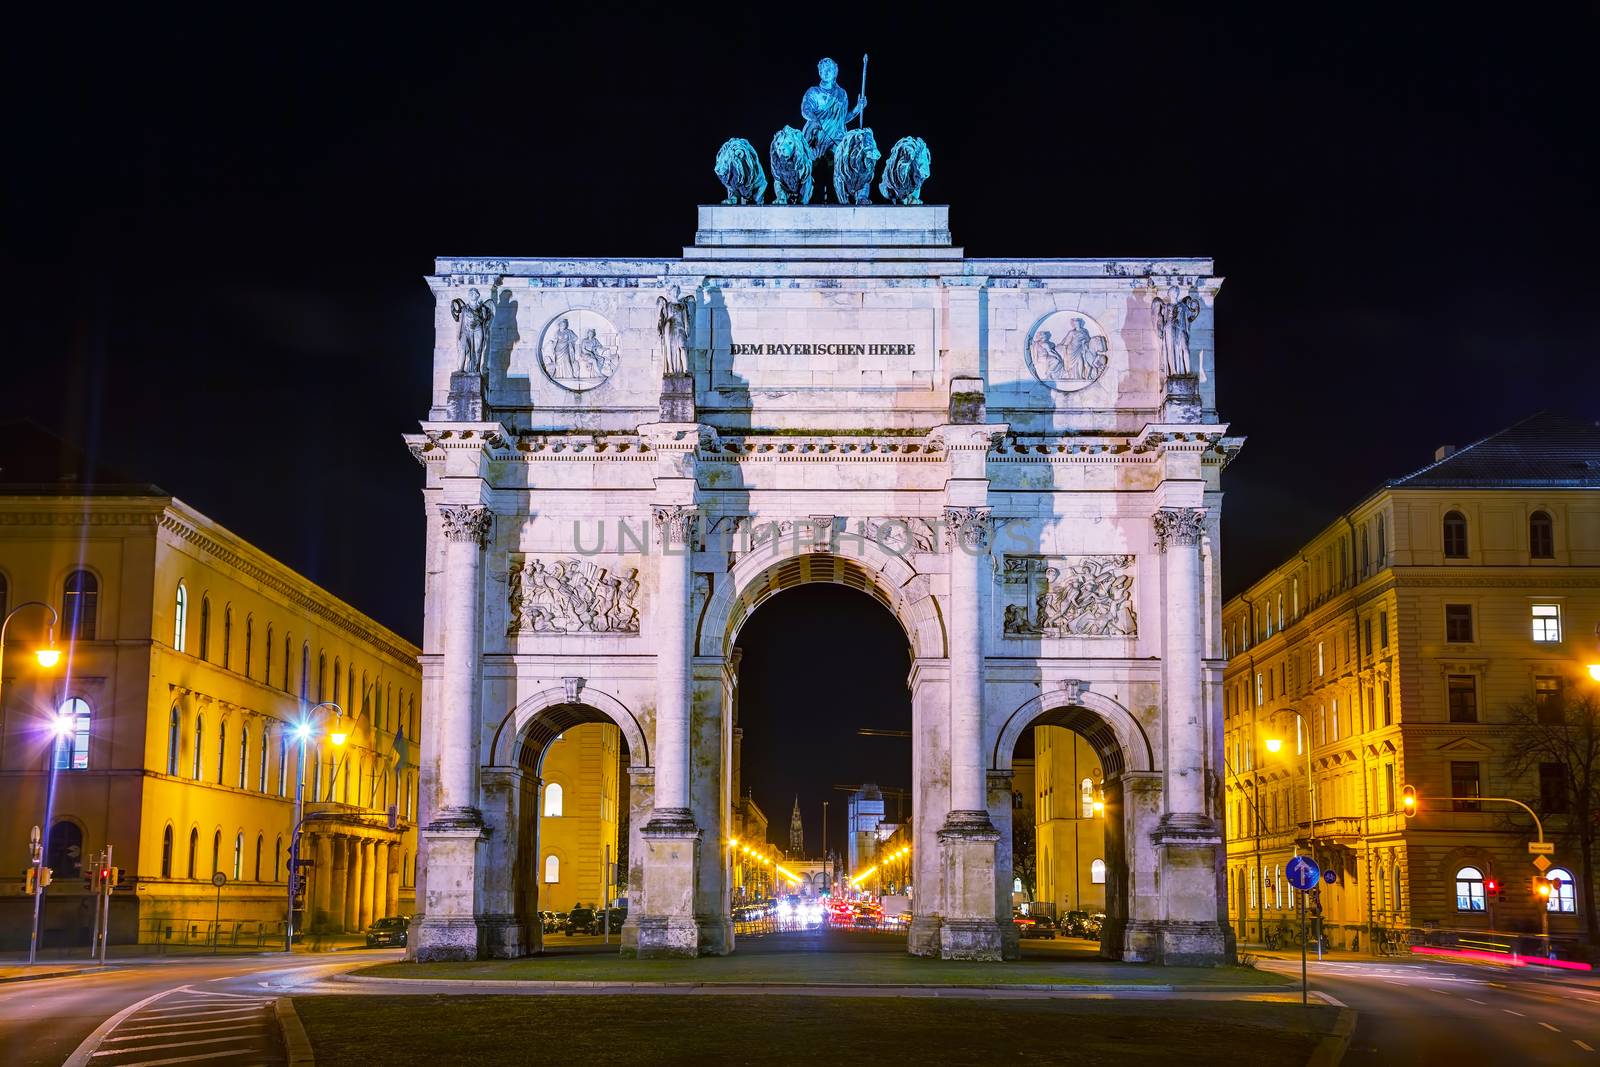 Victory Gate triumphal arch (Siegestor) in Munich, Germany by AndreyKr